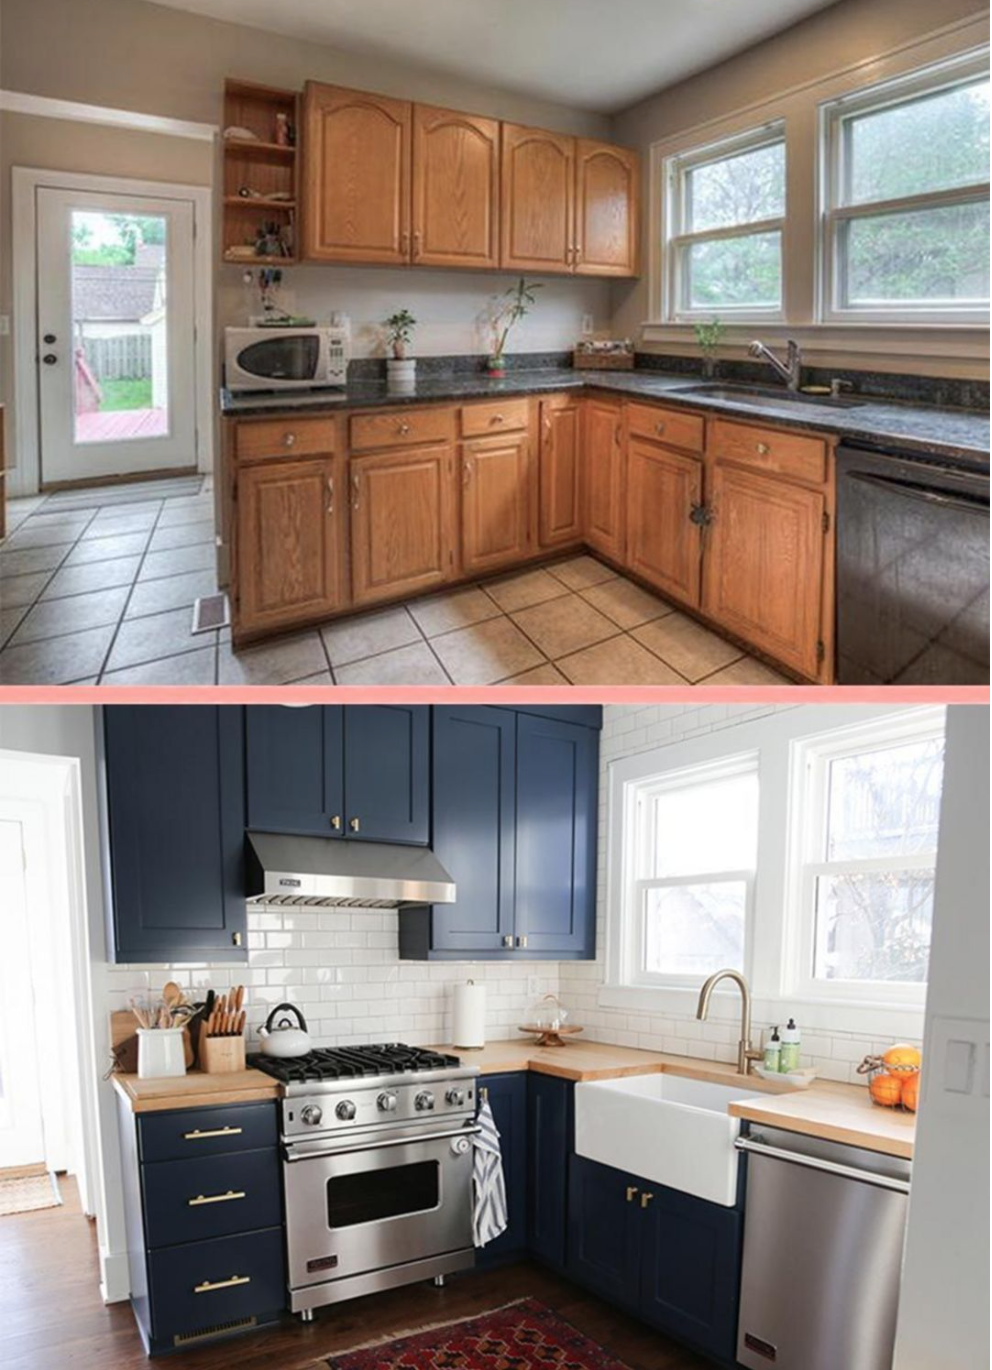 Before and After:  10 Stunning Kitchen Transformations!